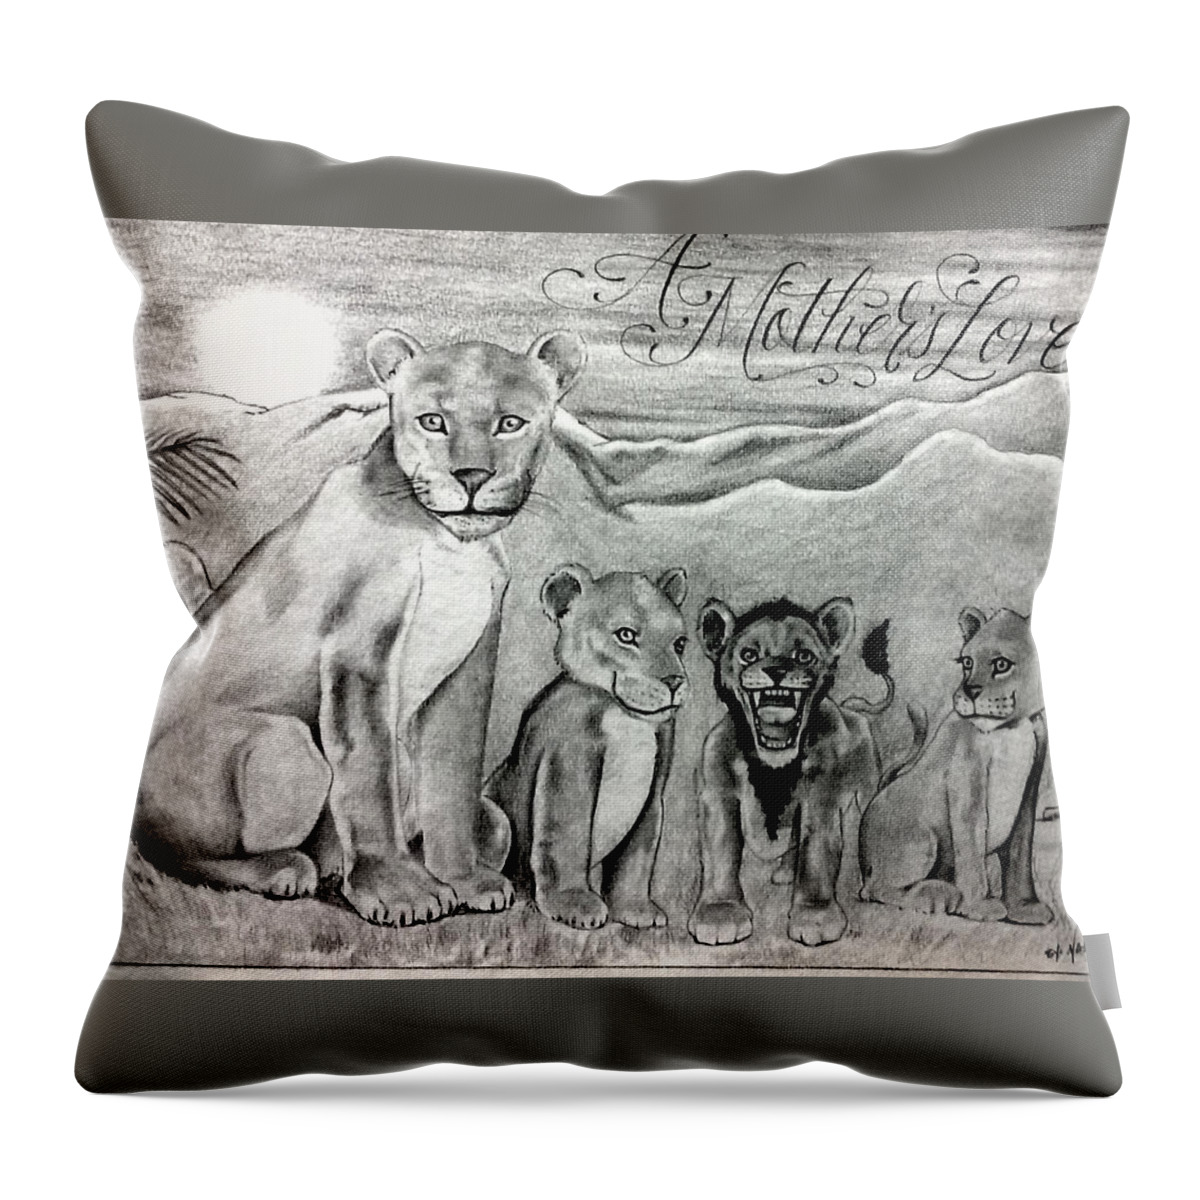 Mexican American Art Throw Pillow featuring the drawing A Motherz Pride by Joseph Lil Man Valencia